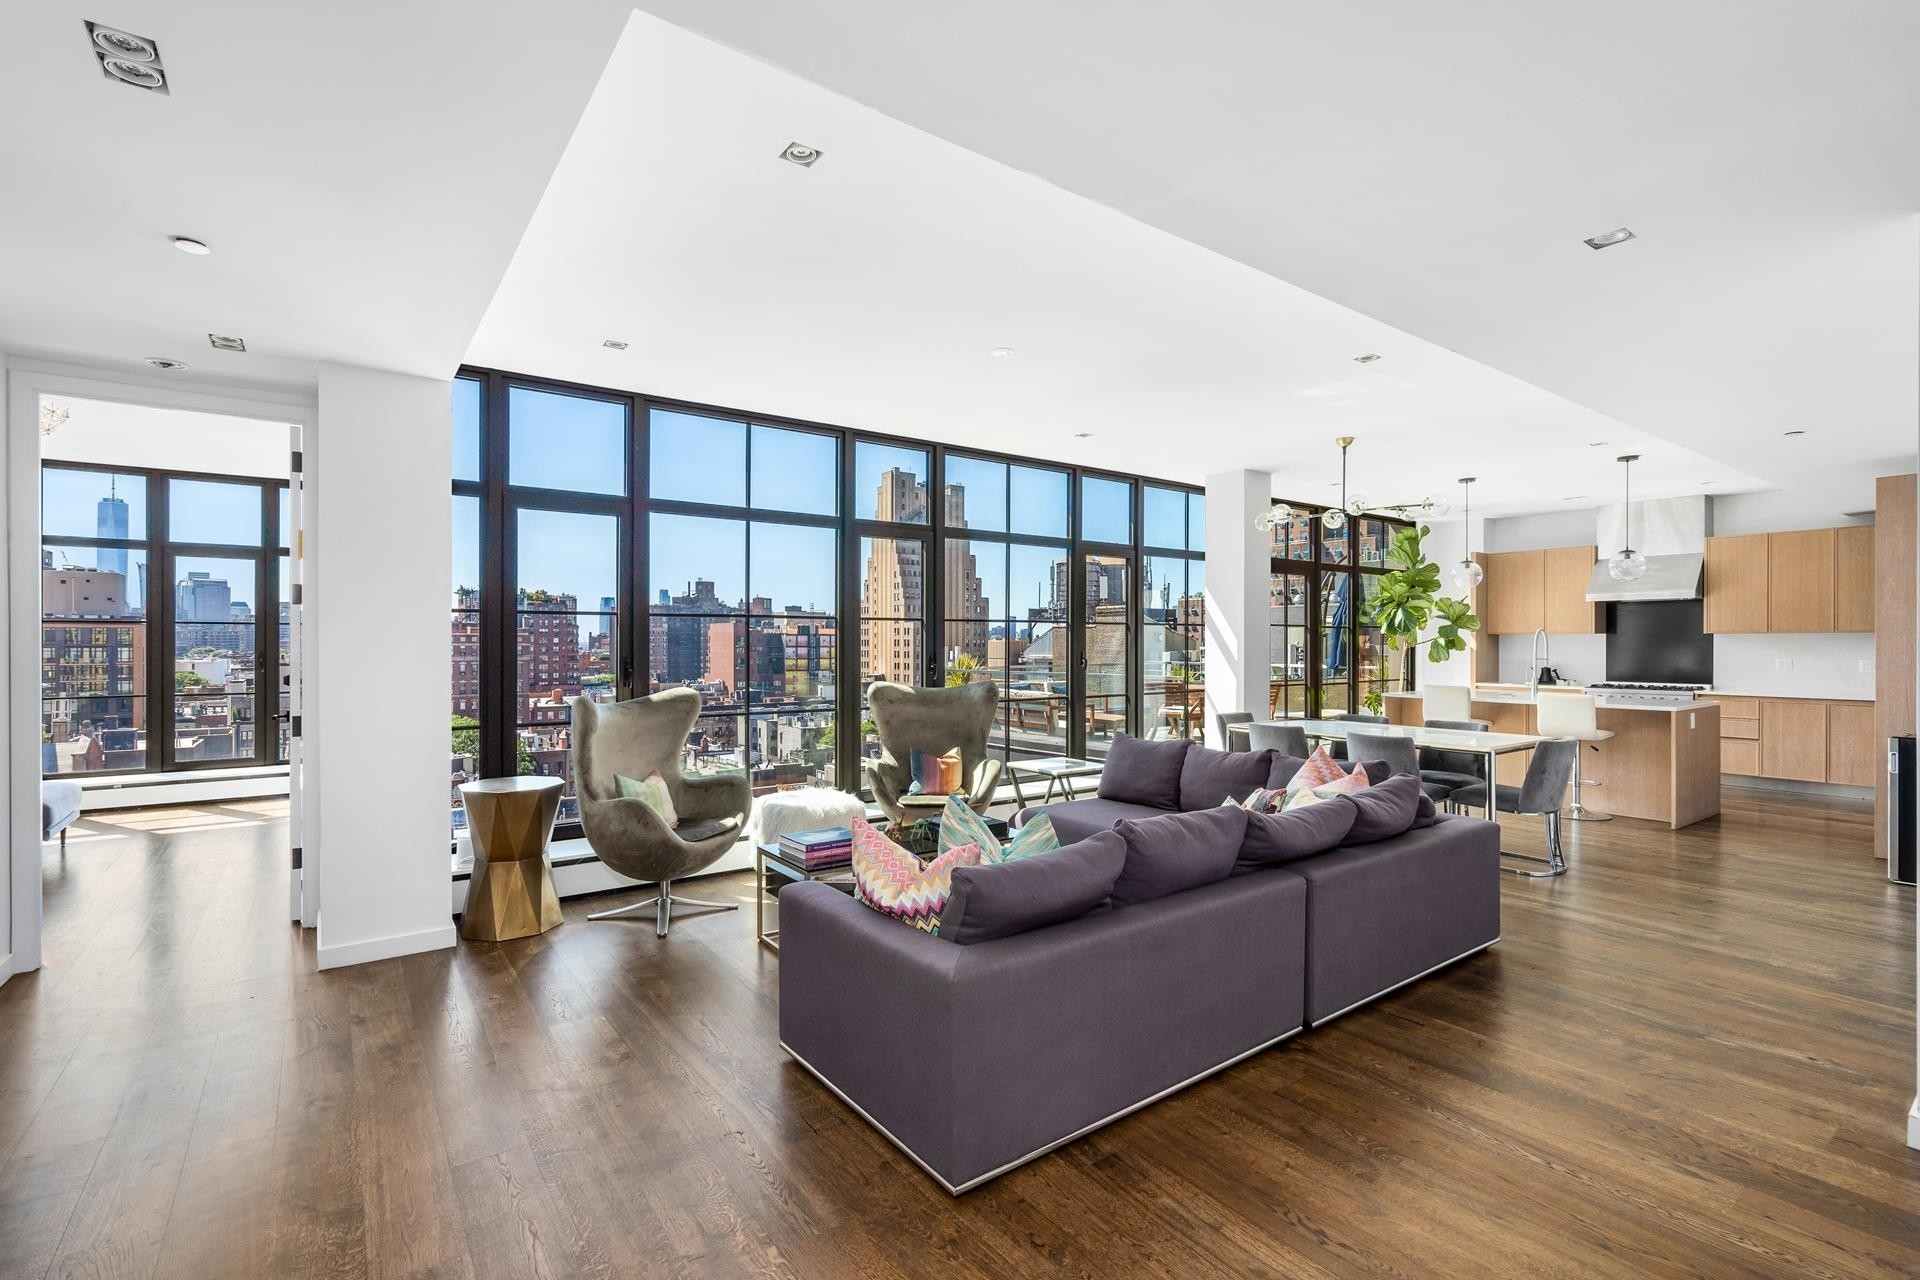 1. Condominiums for Sale at Dorian Chelsea, 225 W 17TH ST, PH Chelsea, New York, New York 10011